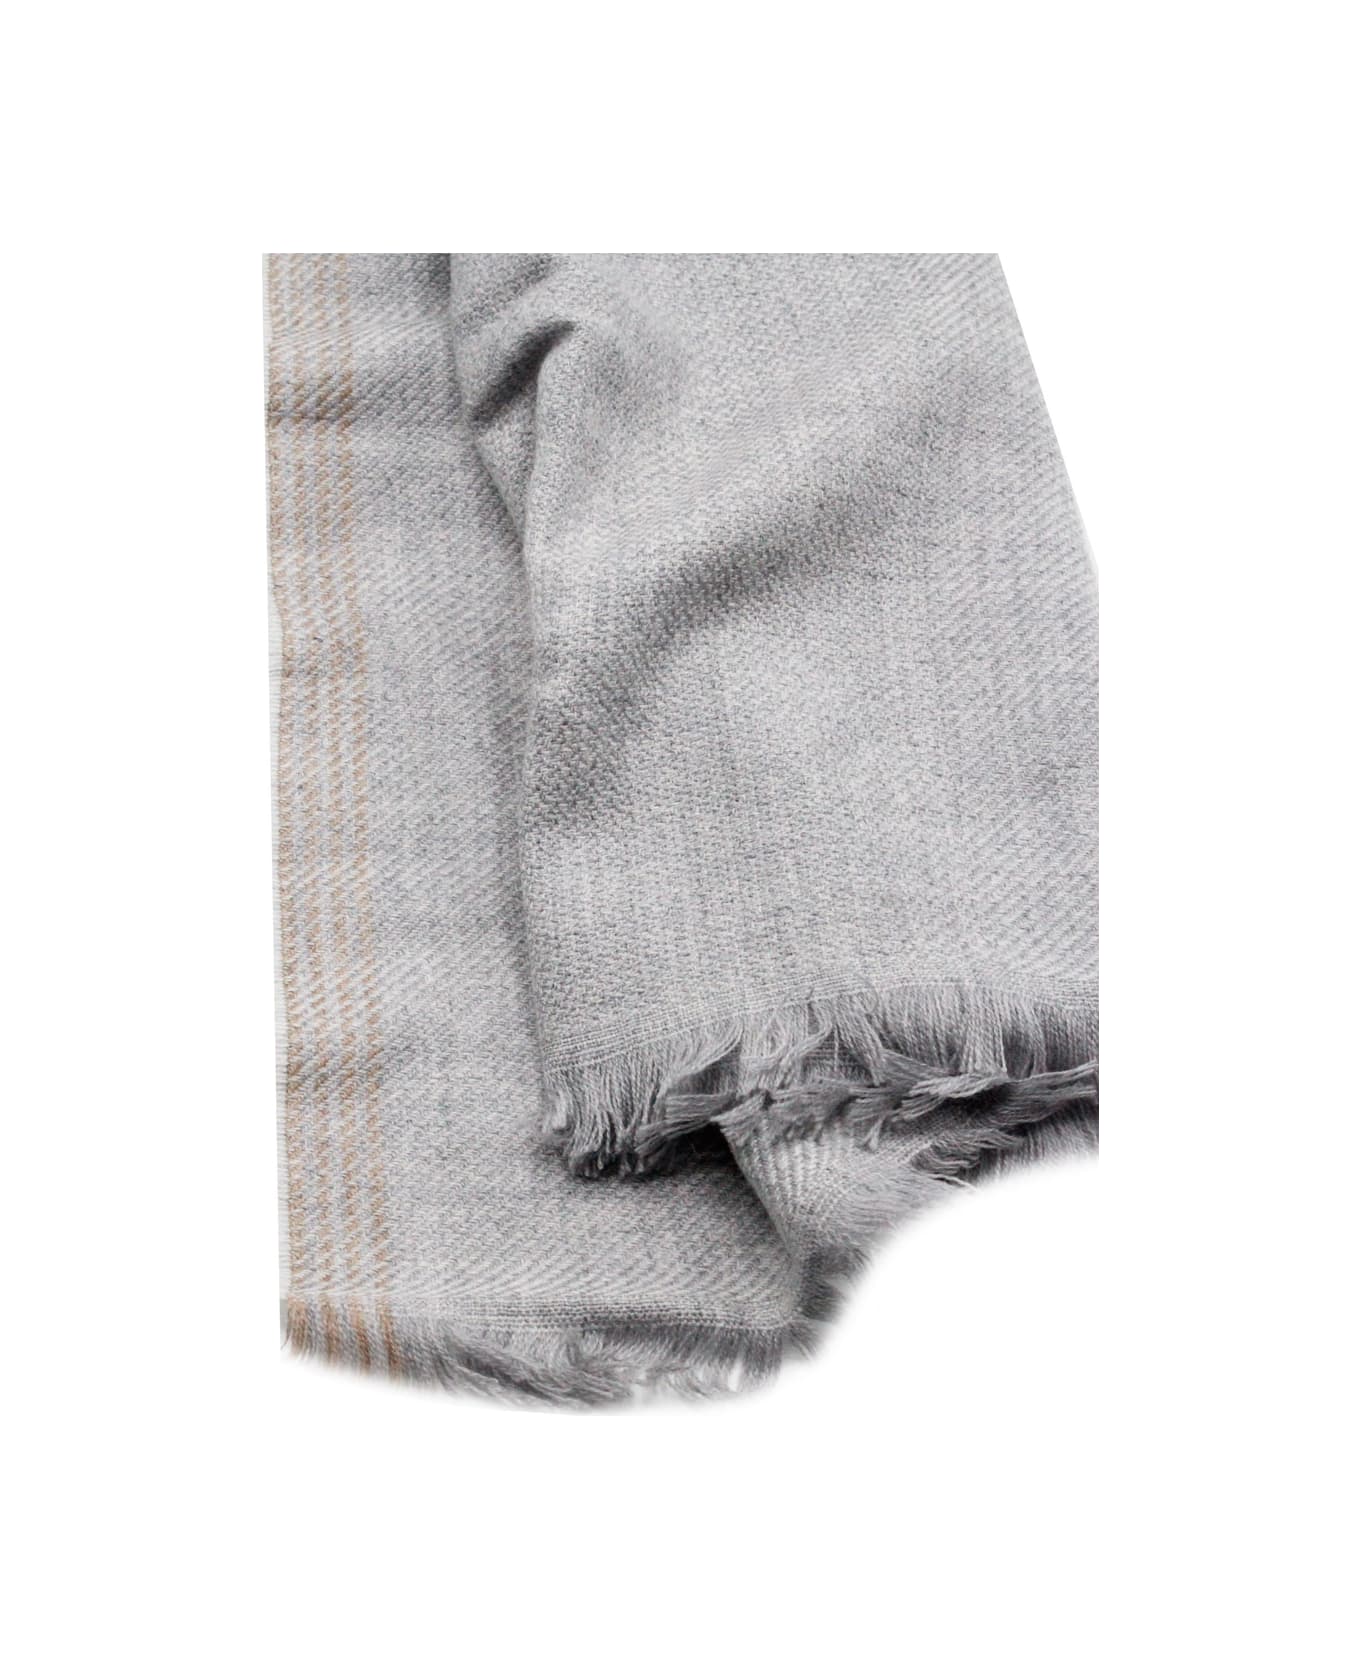 Brunello Cucinelli Lightweight Scarf Made Of Wool And Cashmere With A Light Weave In Diagonaòle And Side Selvedge With Small Fringes At The Bottom - Grey スカーフ